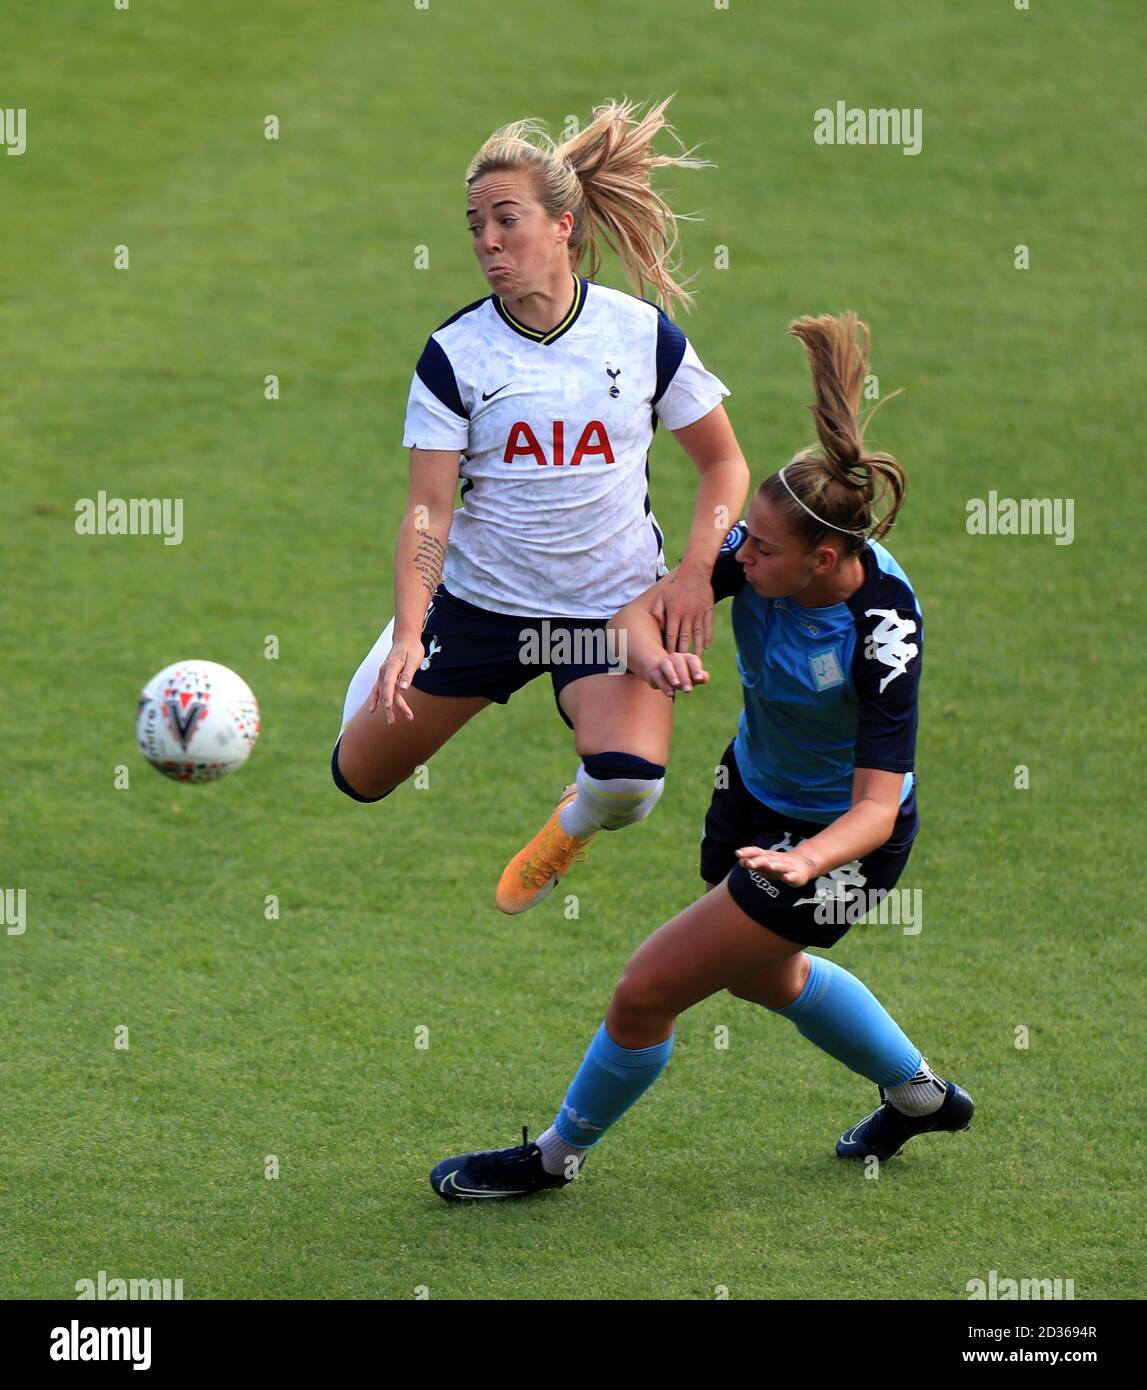 Tottenham Hotspur women's Gemma Davison (left) and London City Lionesses Ylenia Priest battle for the ball during the FA Continental League Cup match at The Hive Stadium, London. Stock Photo